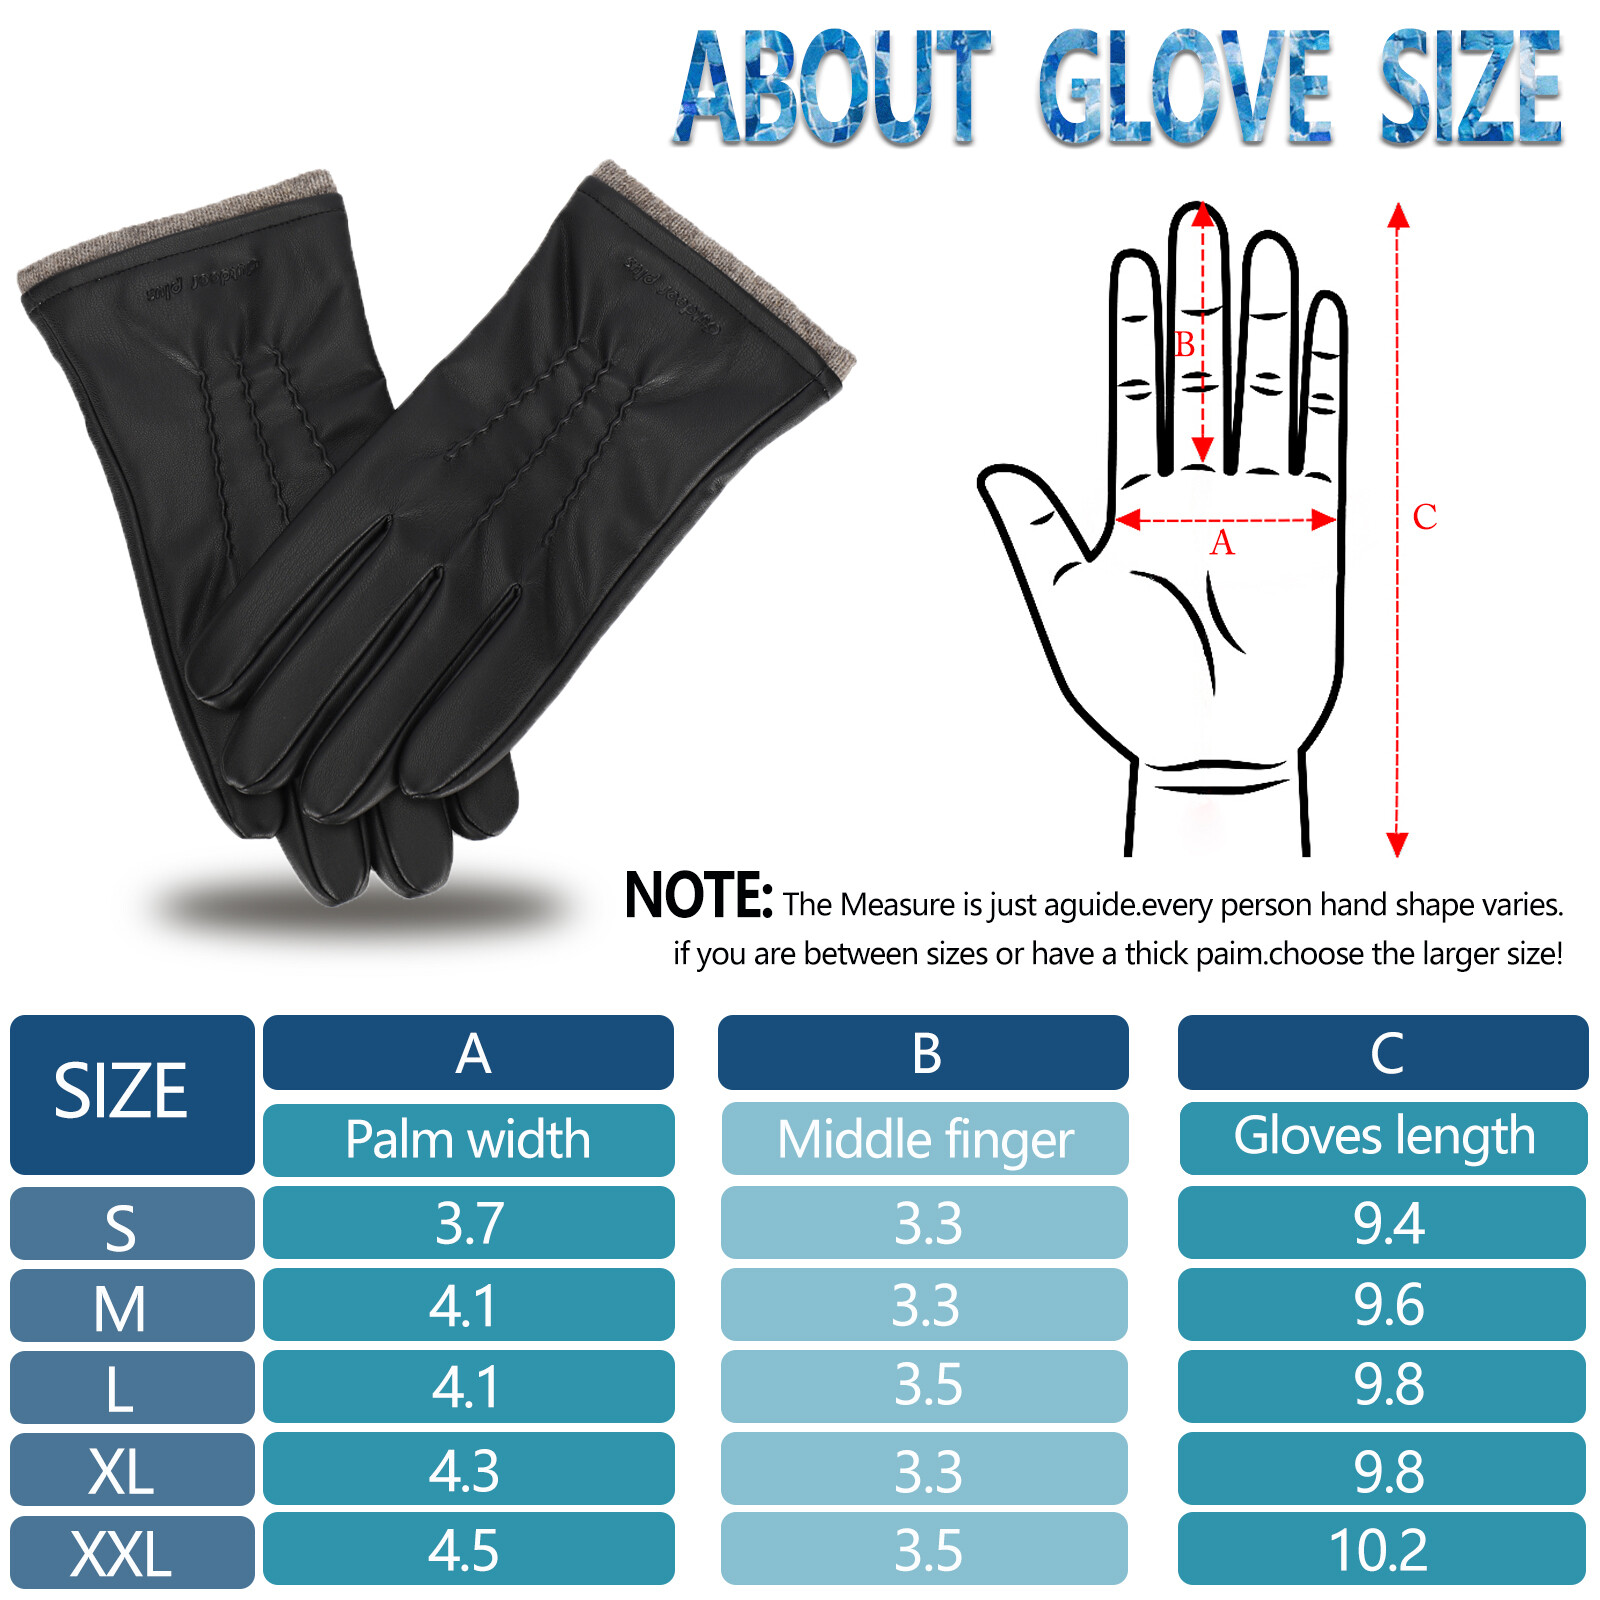 Leather Gloves for Men, Warm Wool Lined PU Leather Winter Gloves Touchscreen Texting,Driving Gloves Men Waterproof - image 4 of 8